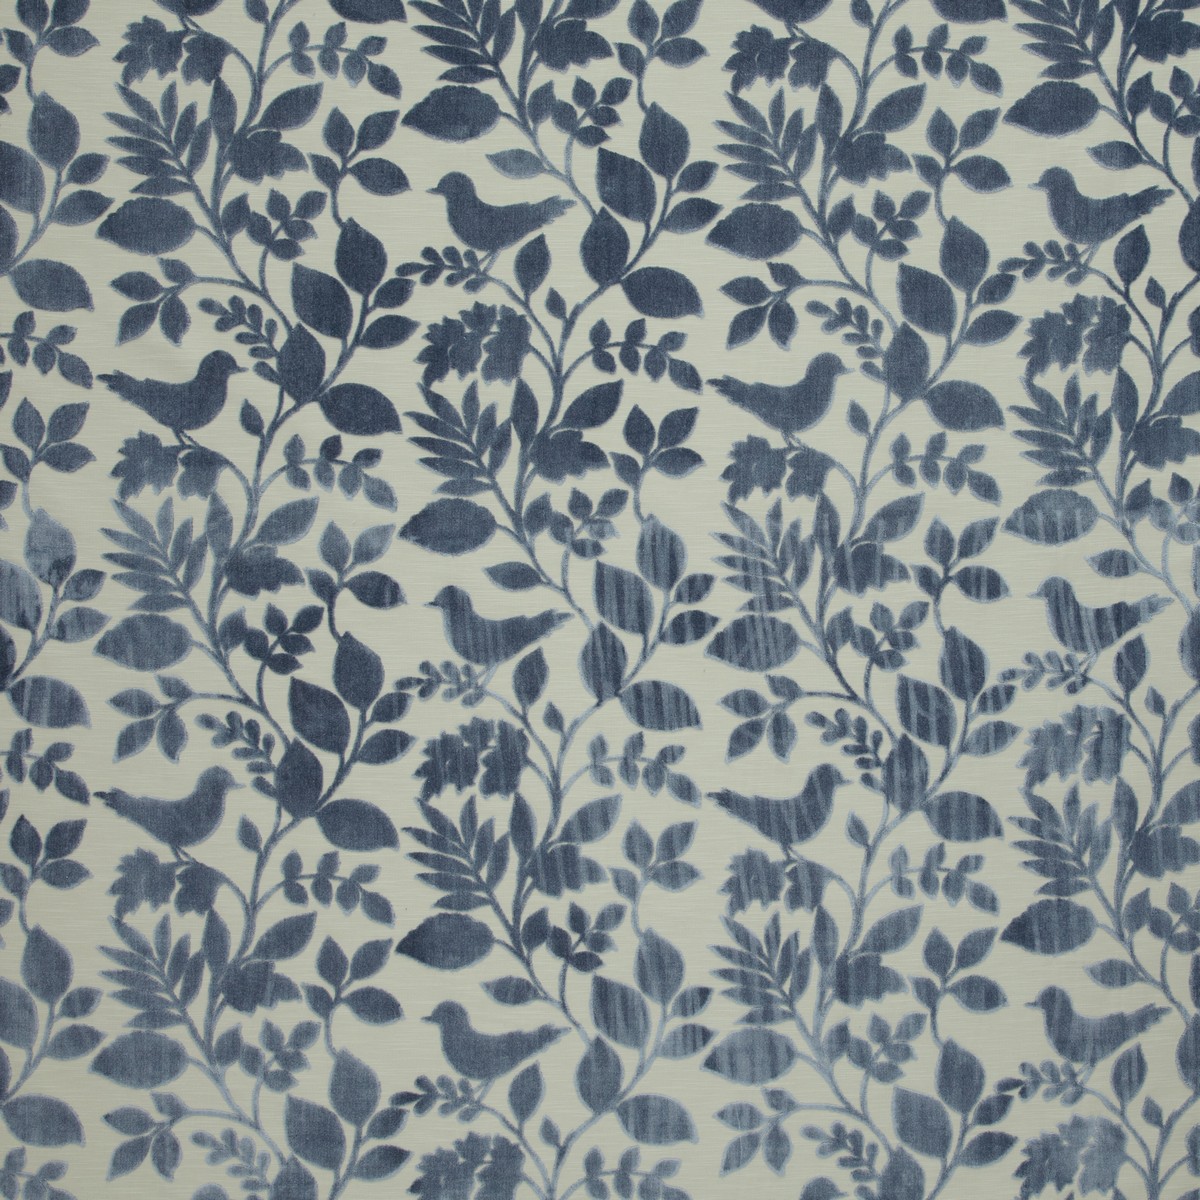 Orchard Birds Delft Fabric by iLiv